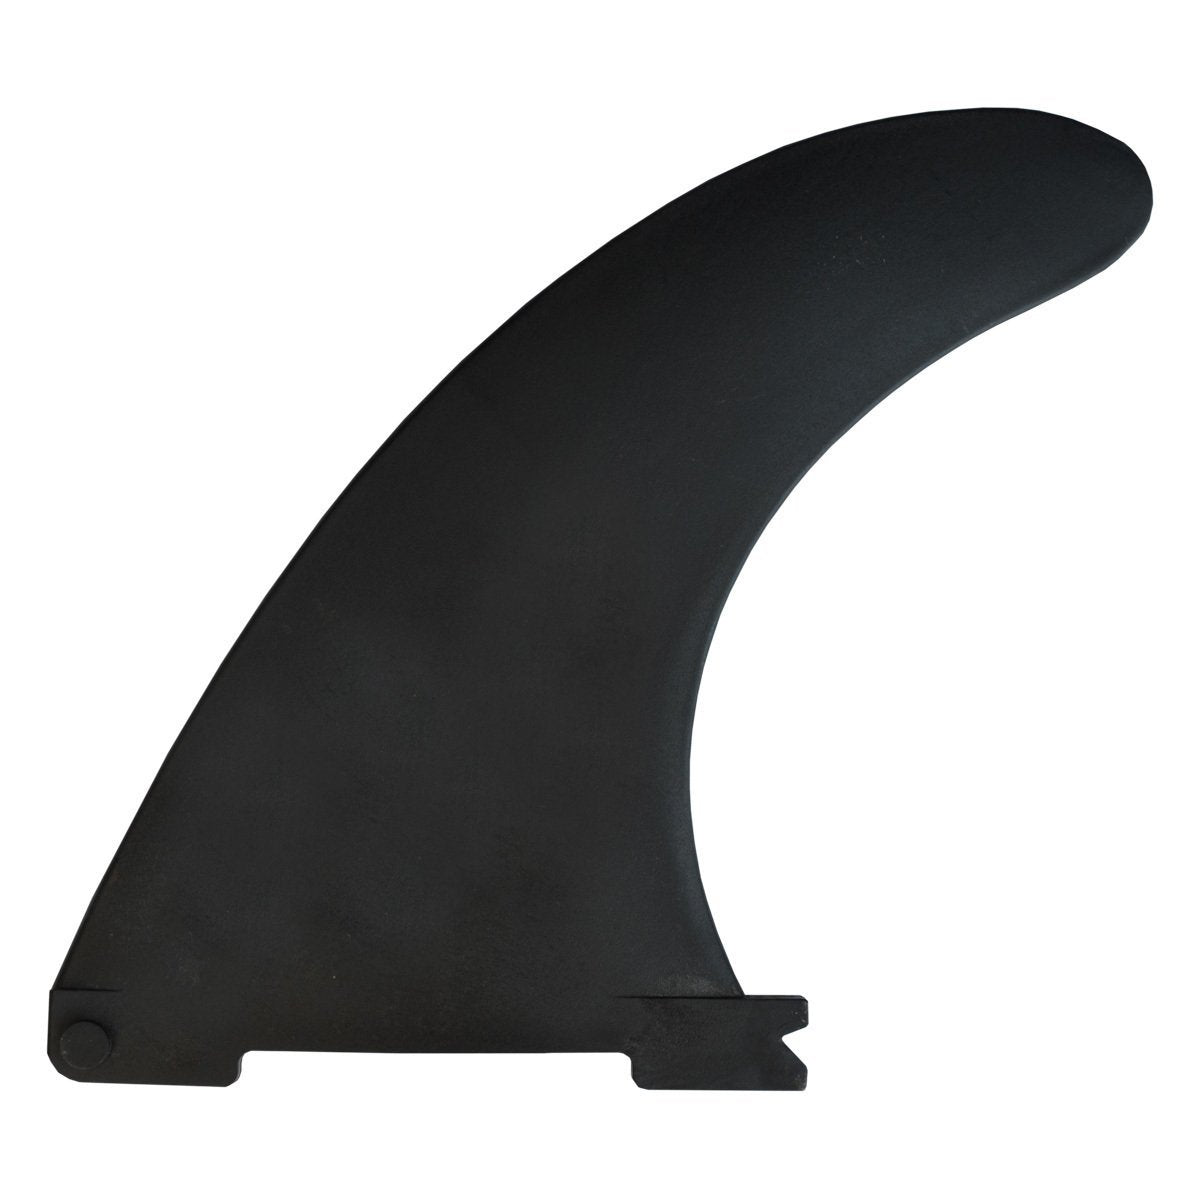 F01 | Freein for Center Fin – old FreeinSUP Replacement Explorer